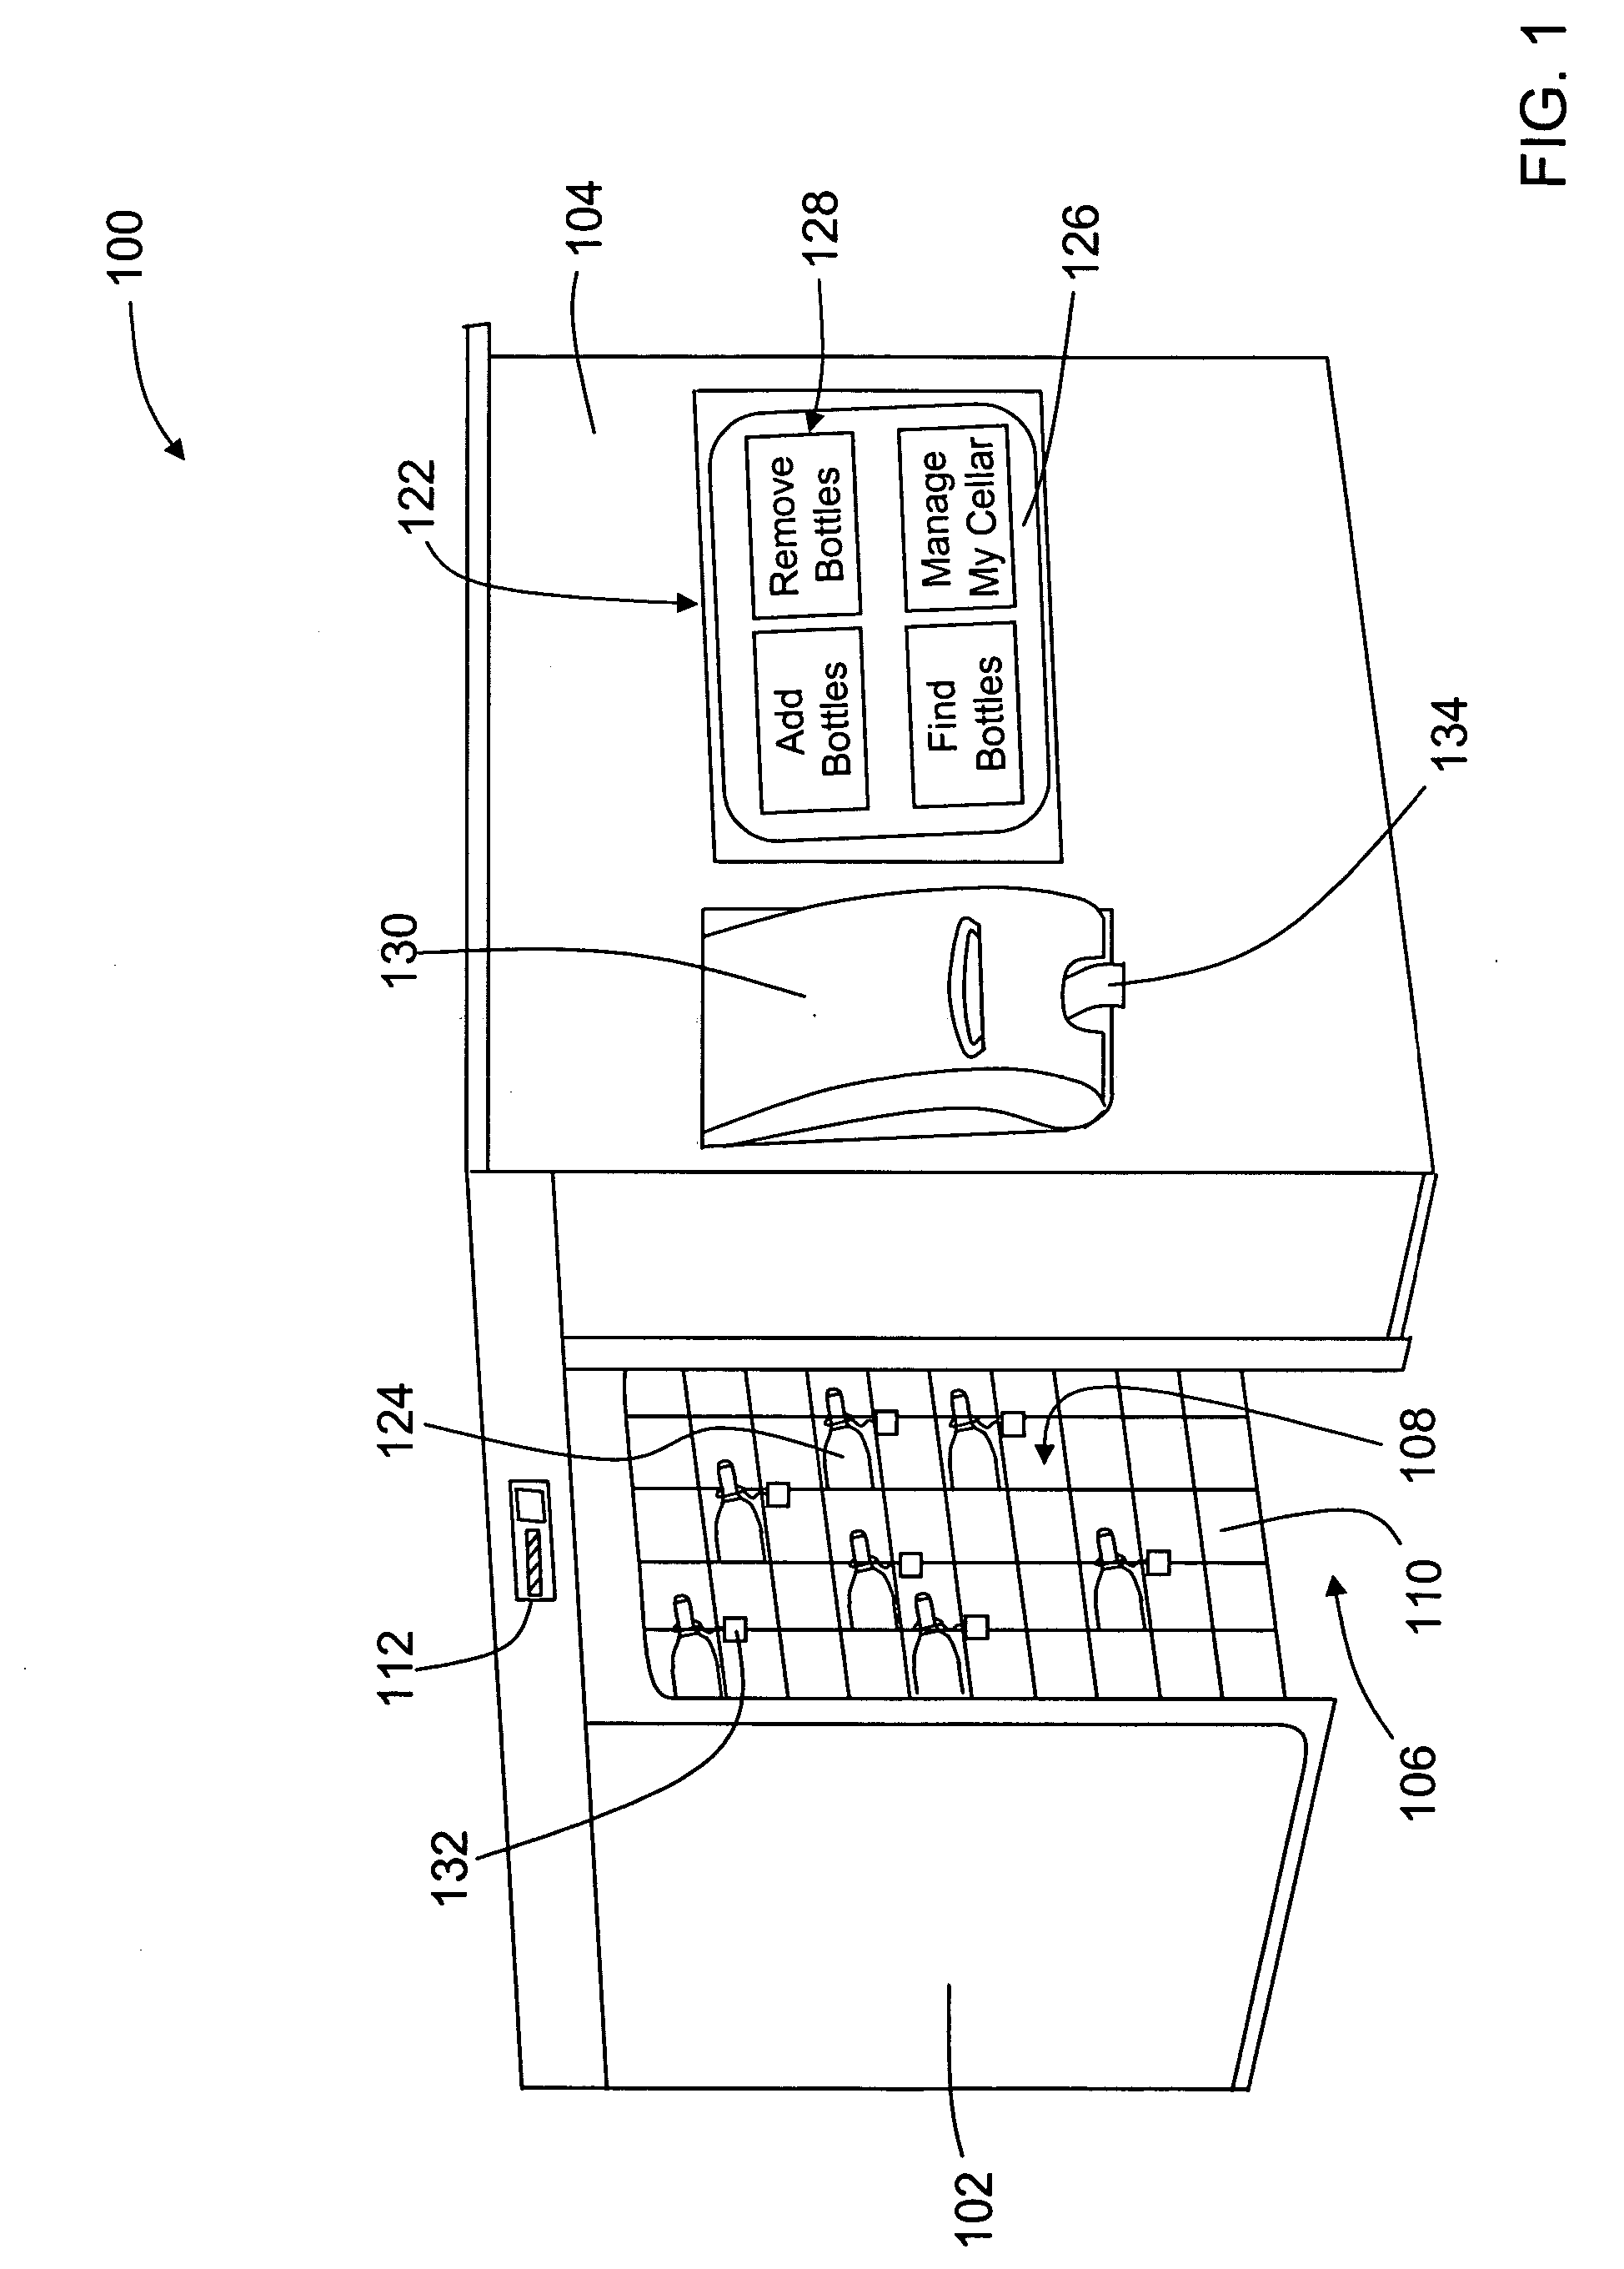 Cellar management system and methods for managing a wine cellar